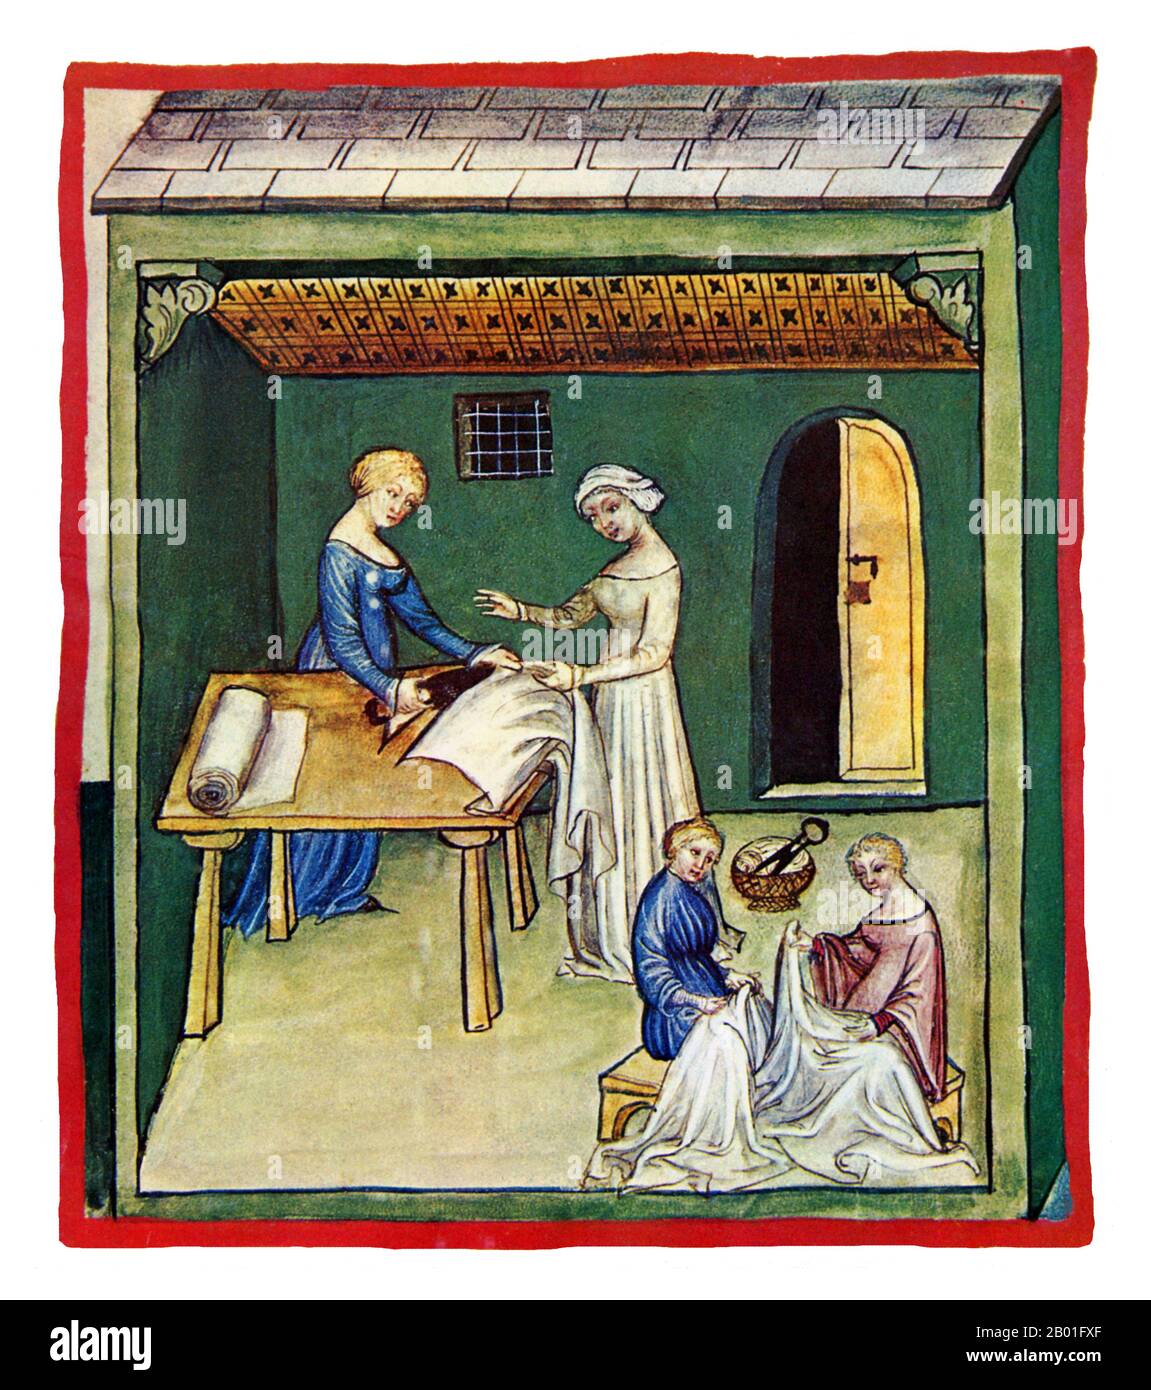 Iraq/Italy:  Linen Clothing (Vestits Linea). Illustration from Ibn Butlan's Taqwim al-sihha or 'Maintenance of Health' (Baghdad, 11th century), published in Italy as the Tacuinum Sanitatis, 14th century.  The Tacuinum (sometimes Taccuinum) Sanitatis is a medieval handbook on health and well being, based on the Taqwim al‑sihha تقويم الصحة ('Maintenance of Health'), an eleventh-century Arab medical treatise by Ibn Butlan of Baghdad.  Ibn Butlân was a Christian physician born in Baghdad and who died in 1068. Stock Photo